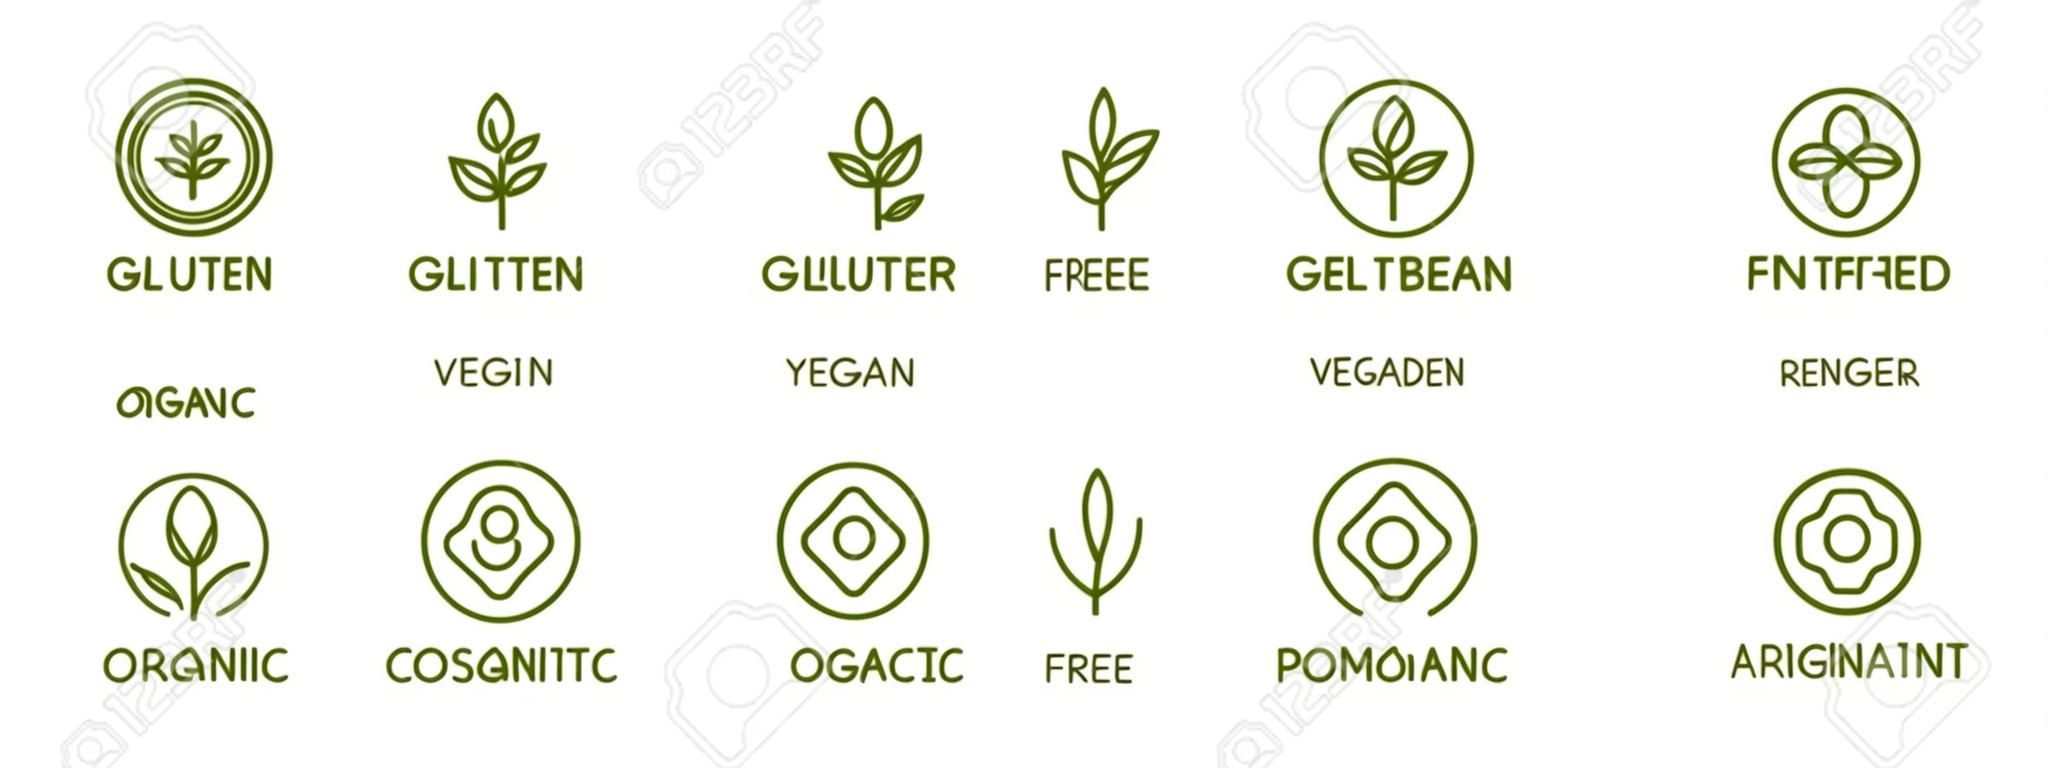 Organic and natural cosmetic line icons. Gluten and paraben free cosmetic. Allergen free badges. Non toxic logo. Skincare symbol. Beauty product. Eco, vegan label. Sensitive skin. Vector illustration